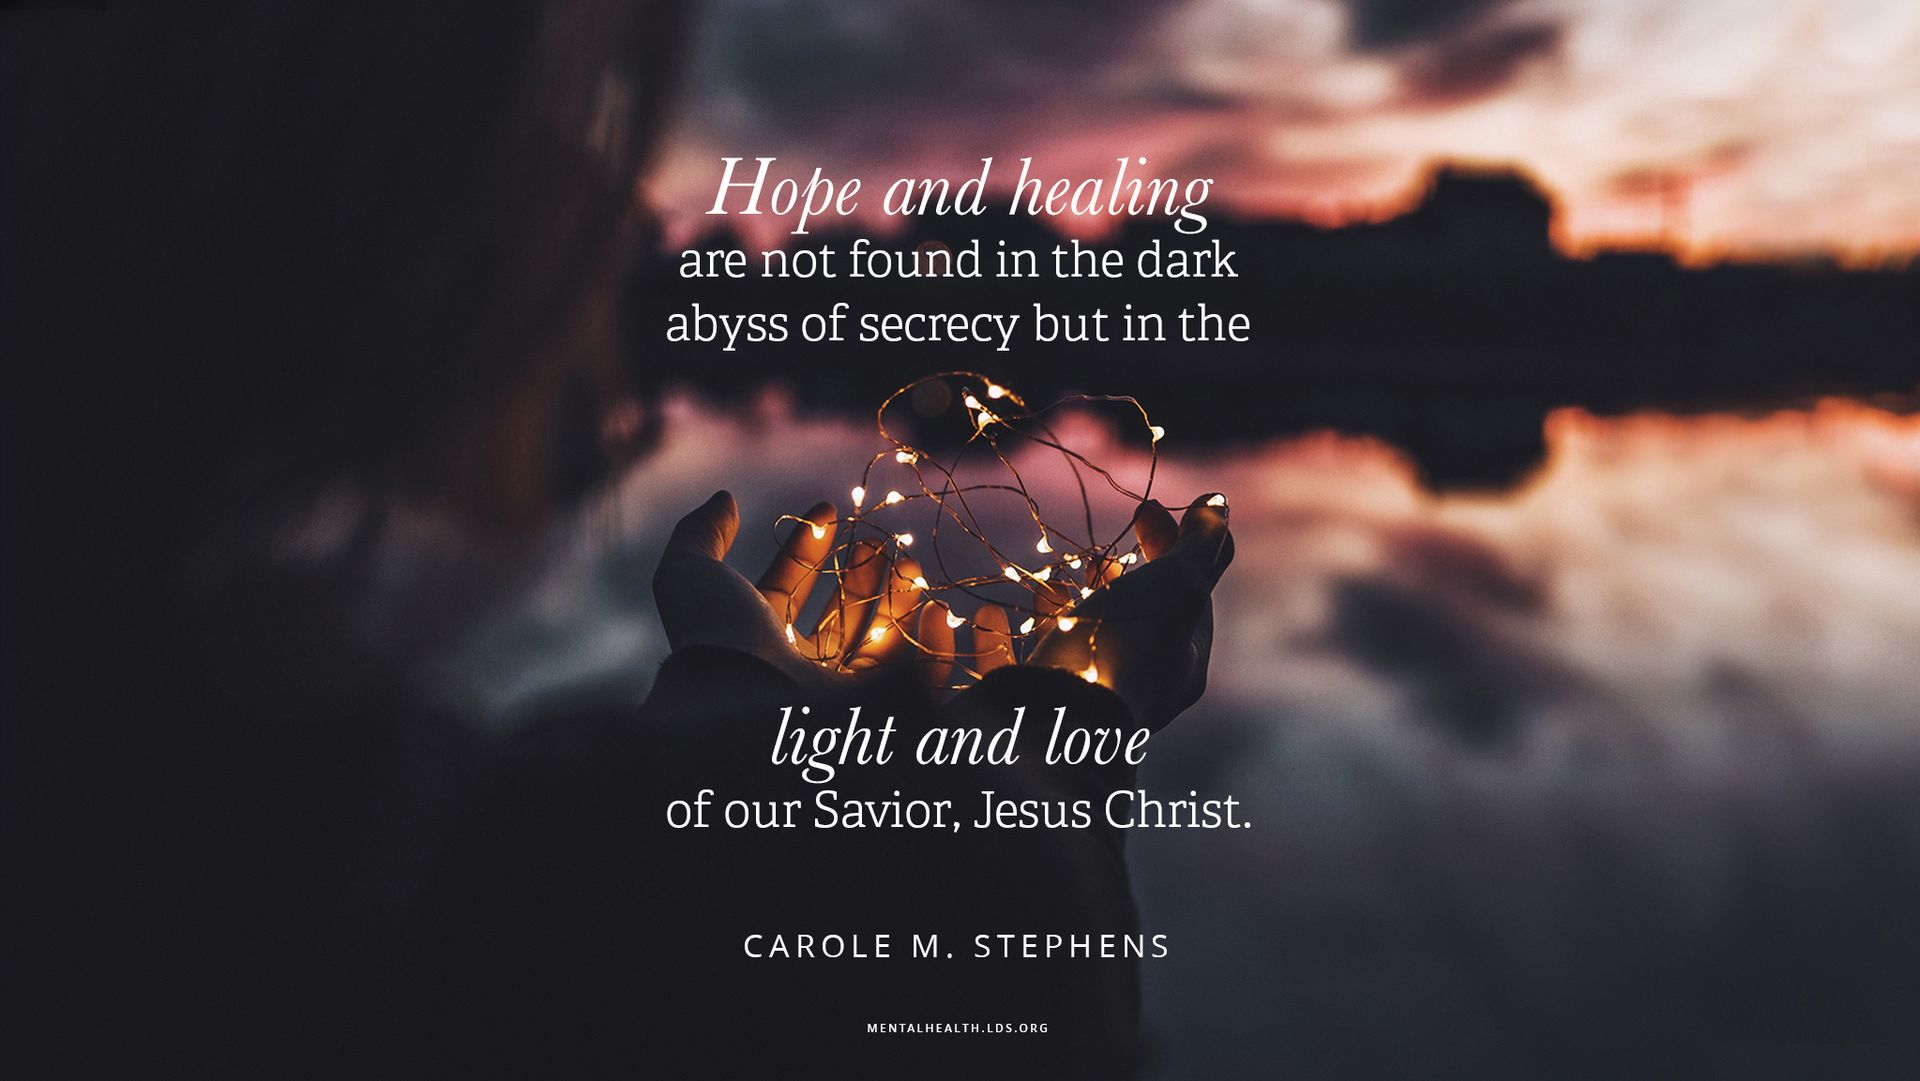 “Hope and healing are not found in the dark abyss of secrecy but in the light and love of our Savior, Jesus Christ.”—Sister Carole M. Stephens, “The Master Healer”